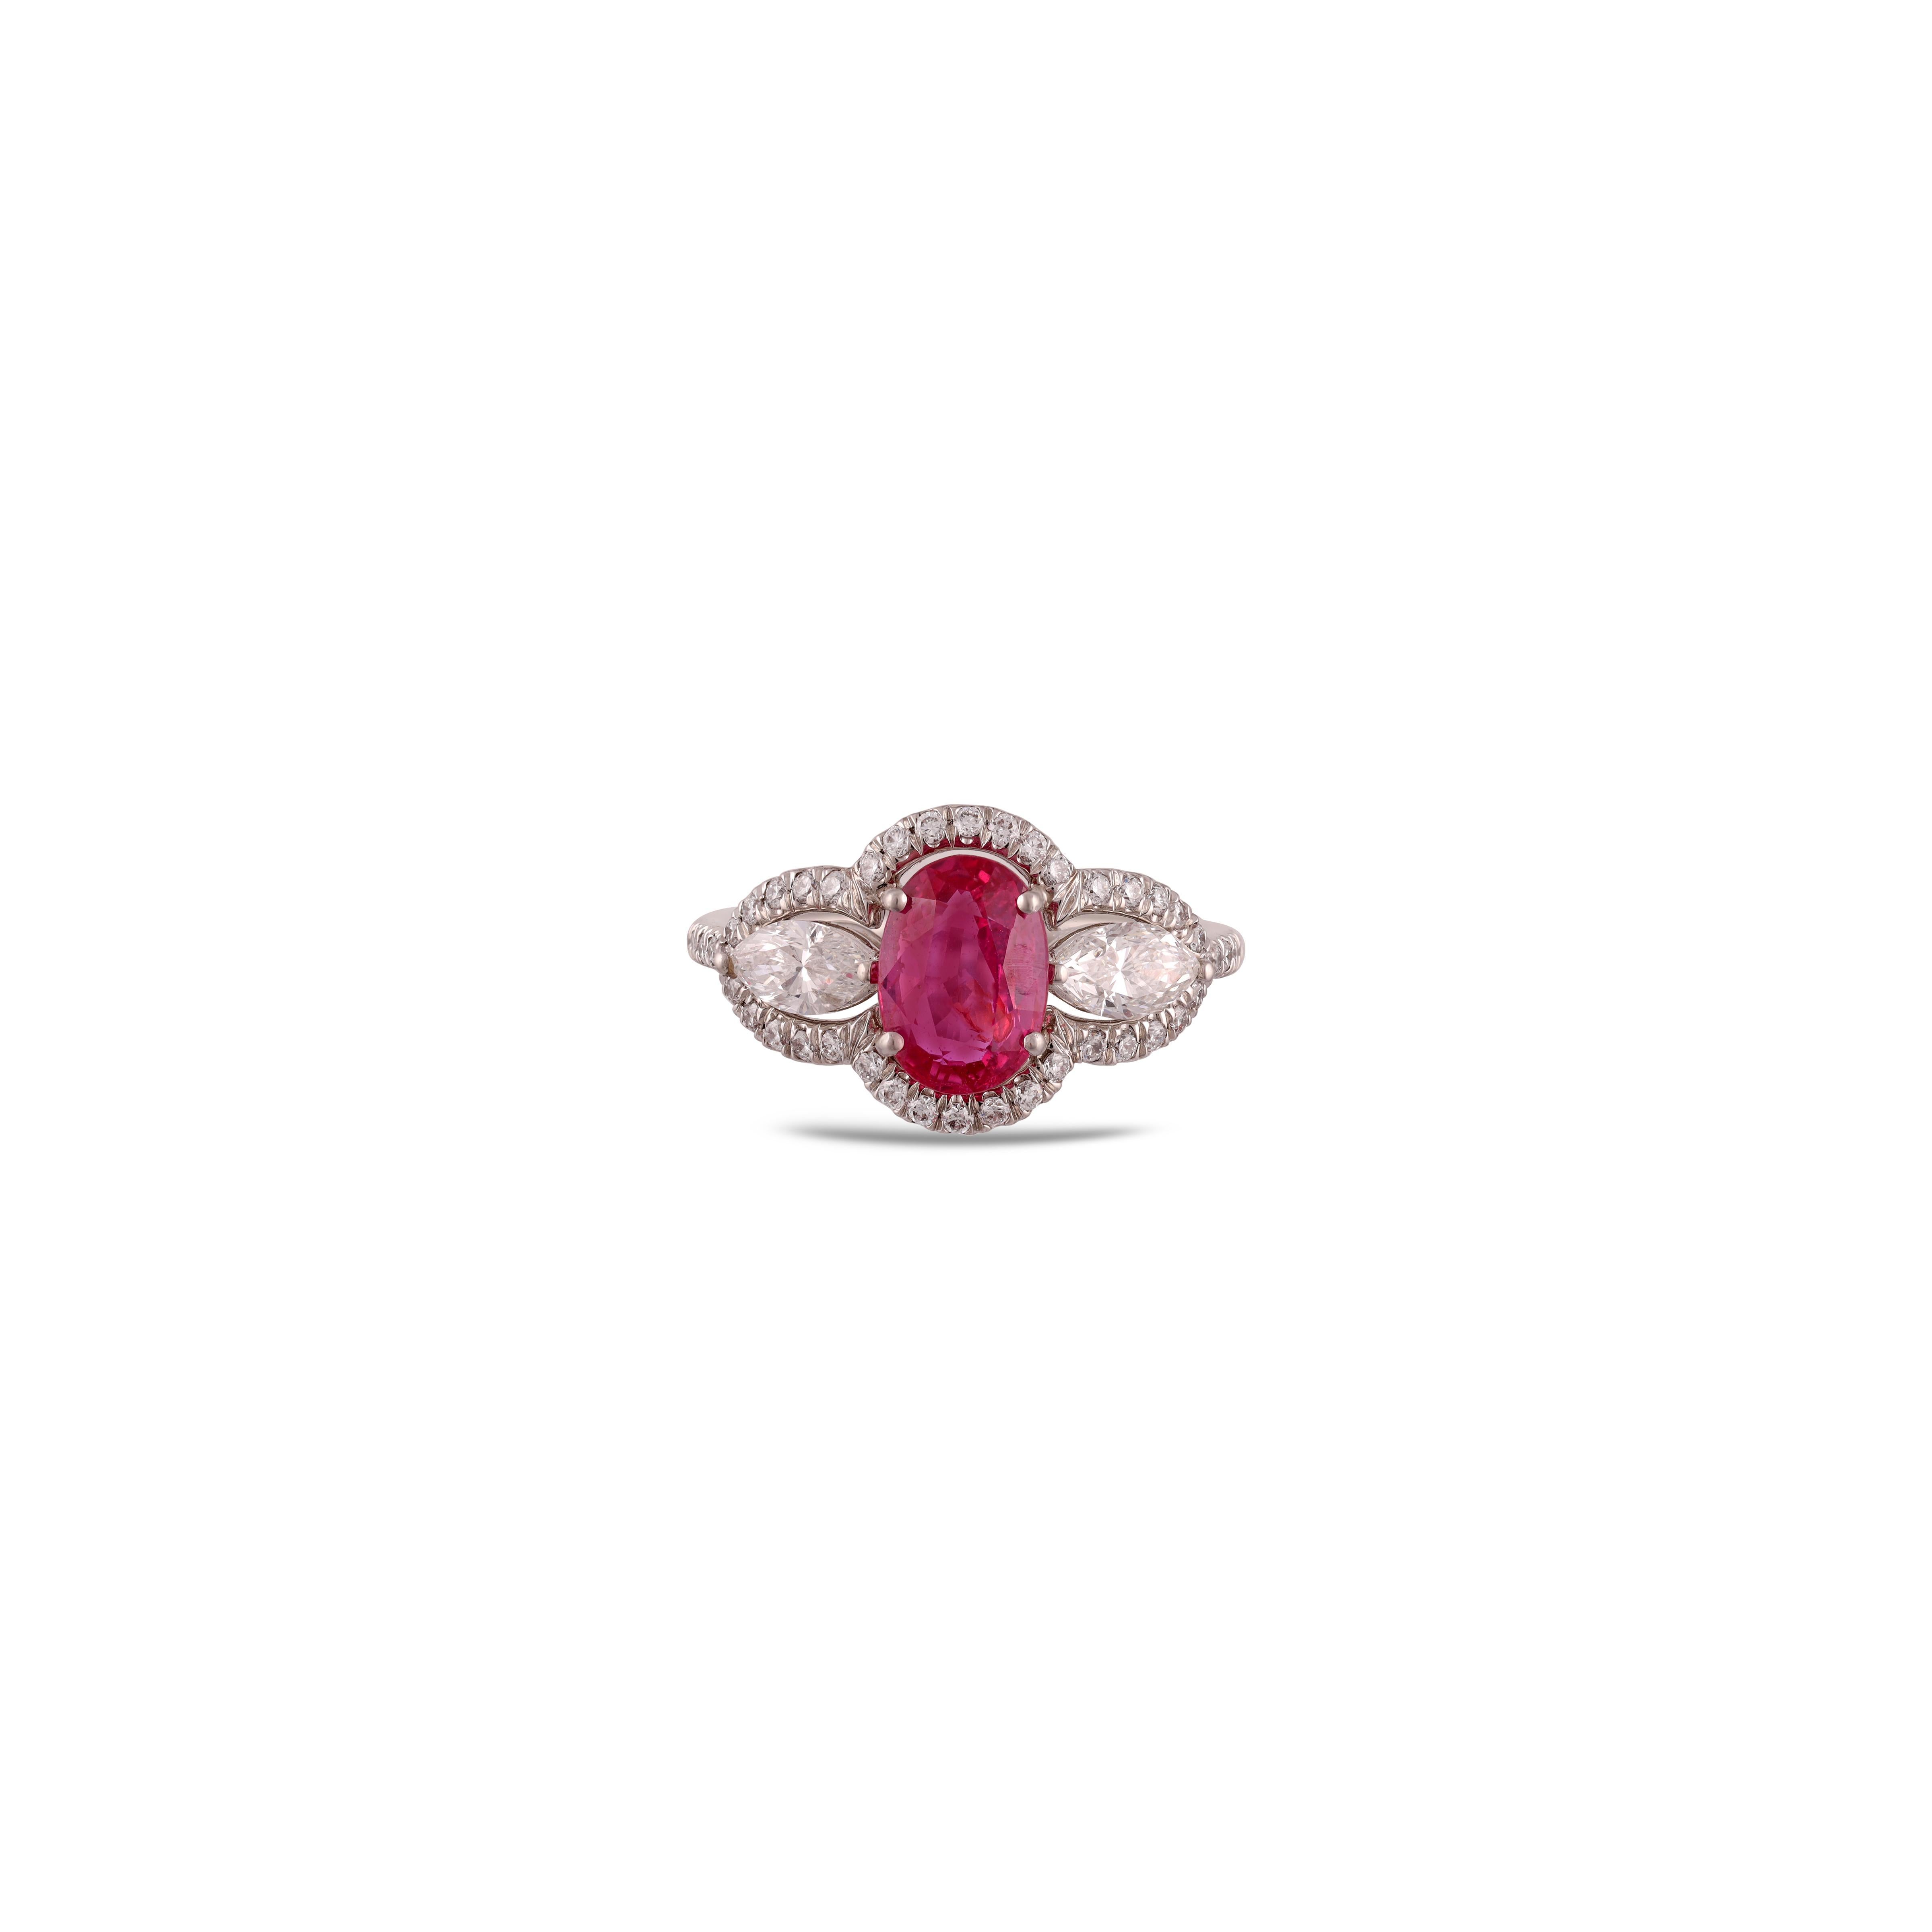 Apart of our carefully curated collection, this ring proudly displays a 2.04 carat  Natural Mozambique ruby crowning a 18k Gold  band. The ruby's prongs hold the stone tightly but allow it to be seen in its entirety. The center stone is surrounded